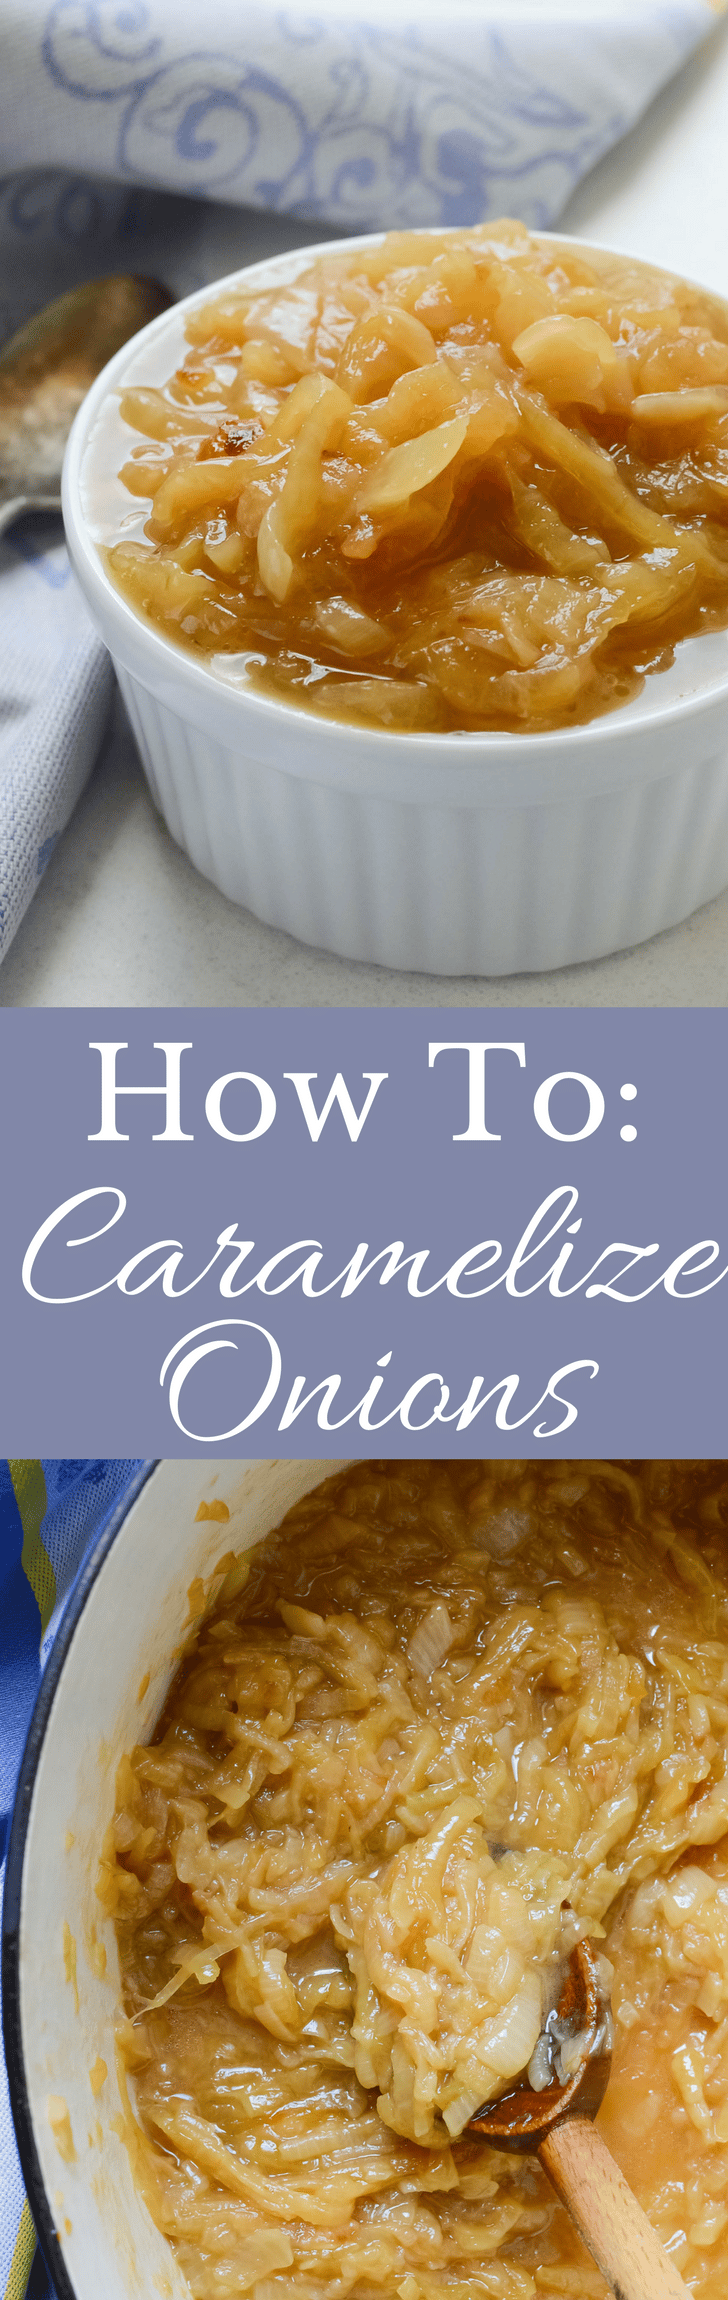 This easy recipe gives step by step instructions on How To Caramelize Onions and different ways to use them! They're sweet and delicious - naturally vegan and gluten free!